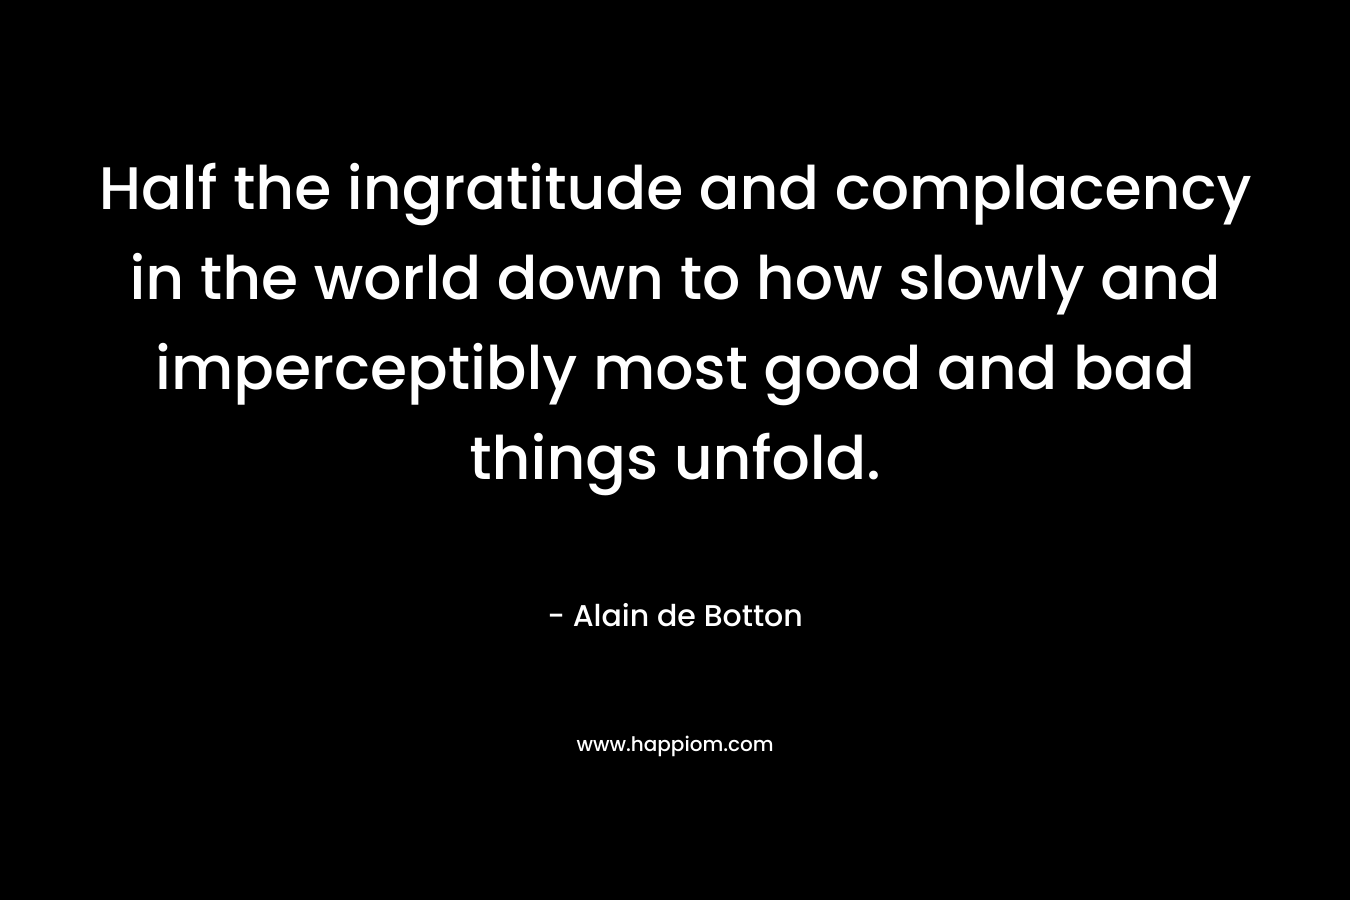 Half the ingratitude and complacency in the world down to how slowly and imperceptibly most good and bad things unfold. – Alain de Botton